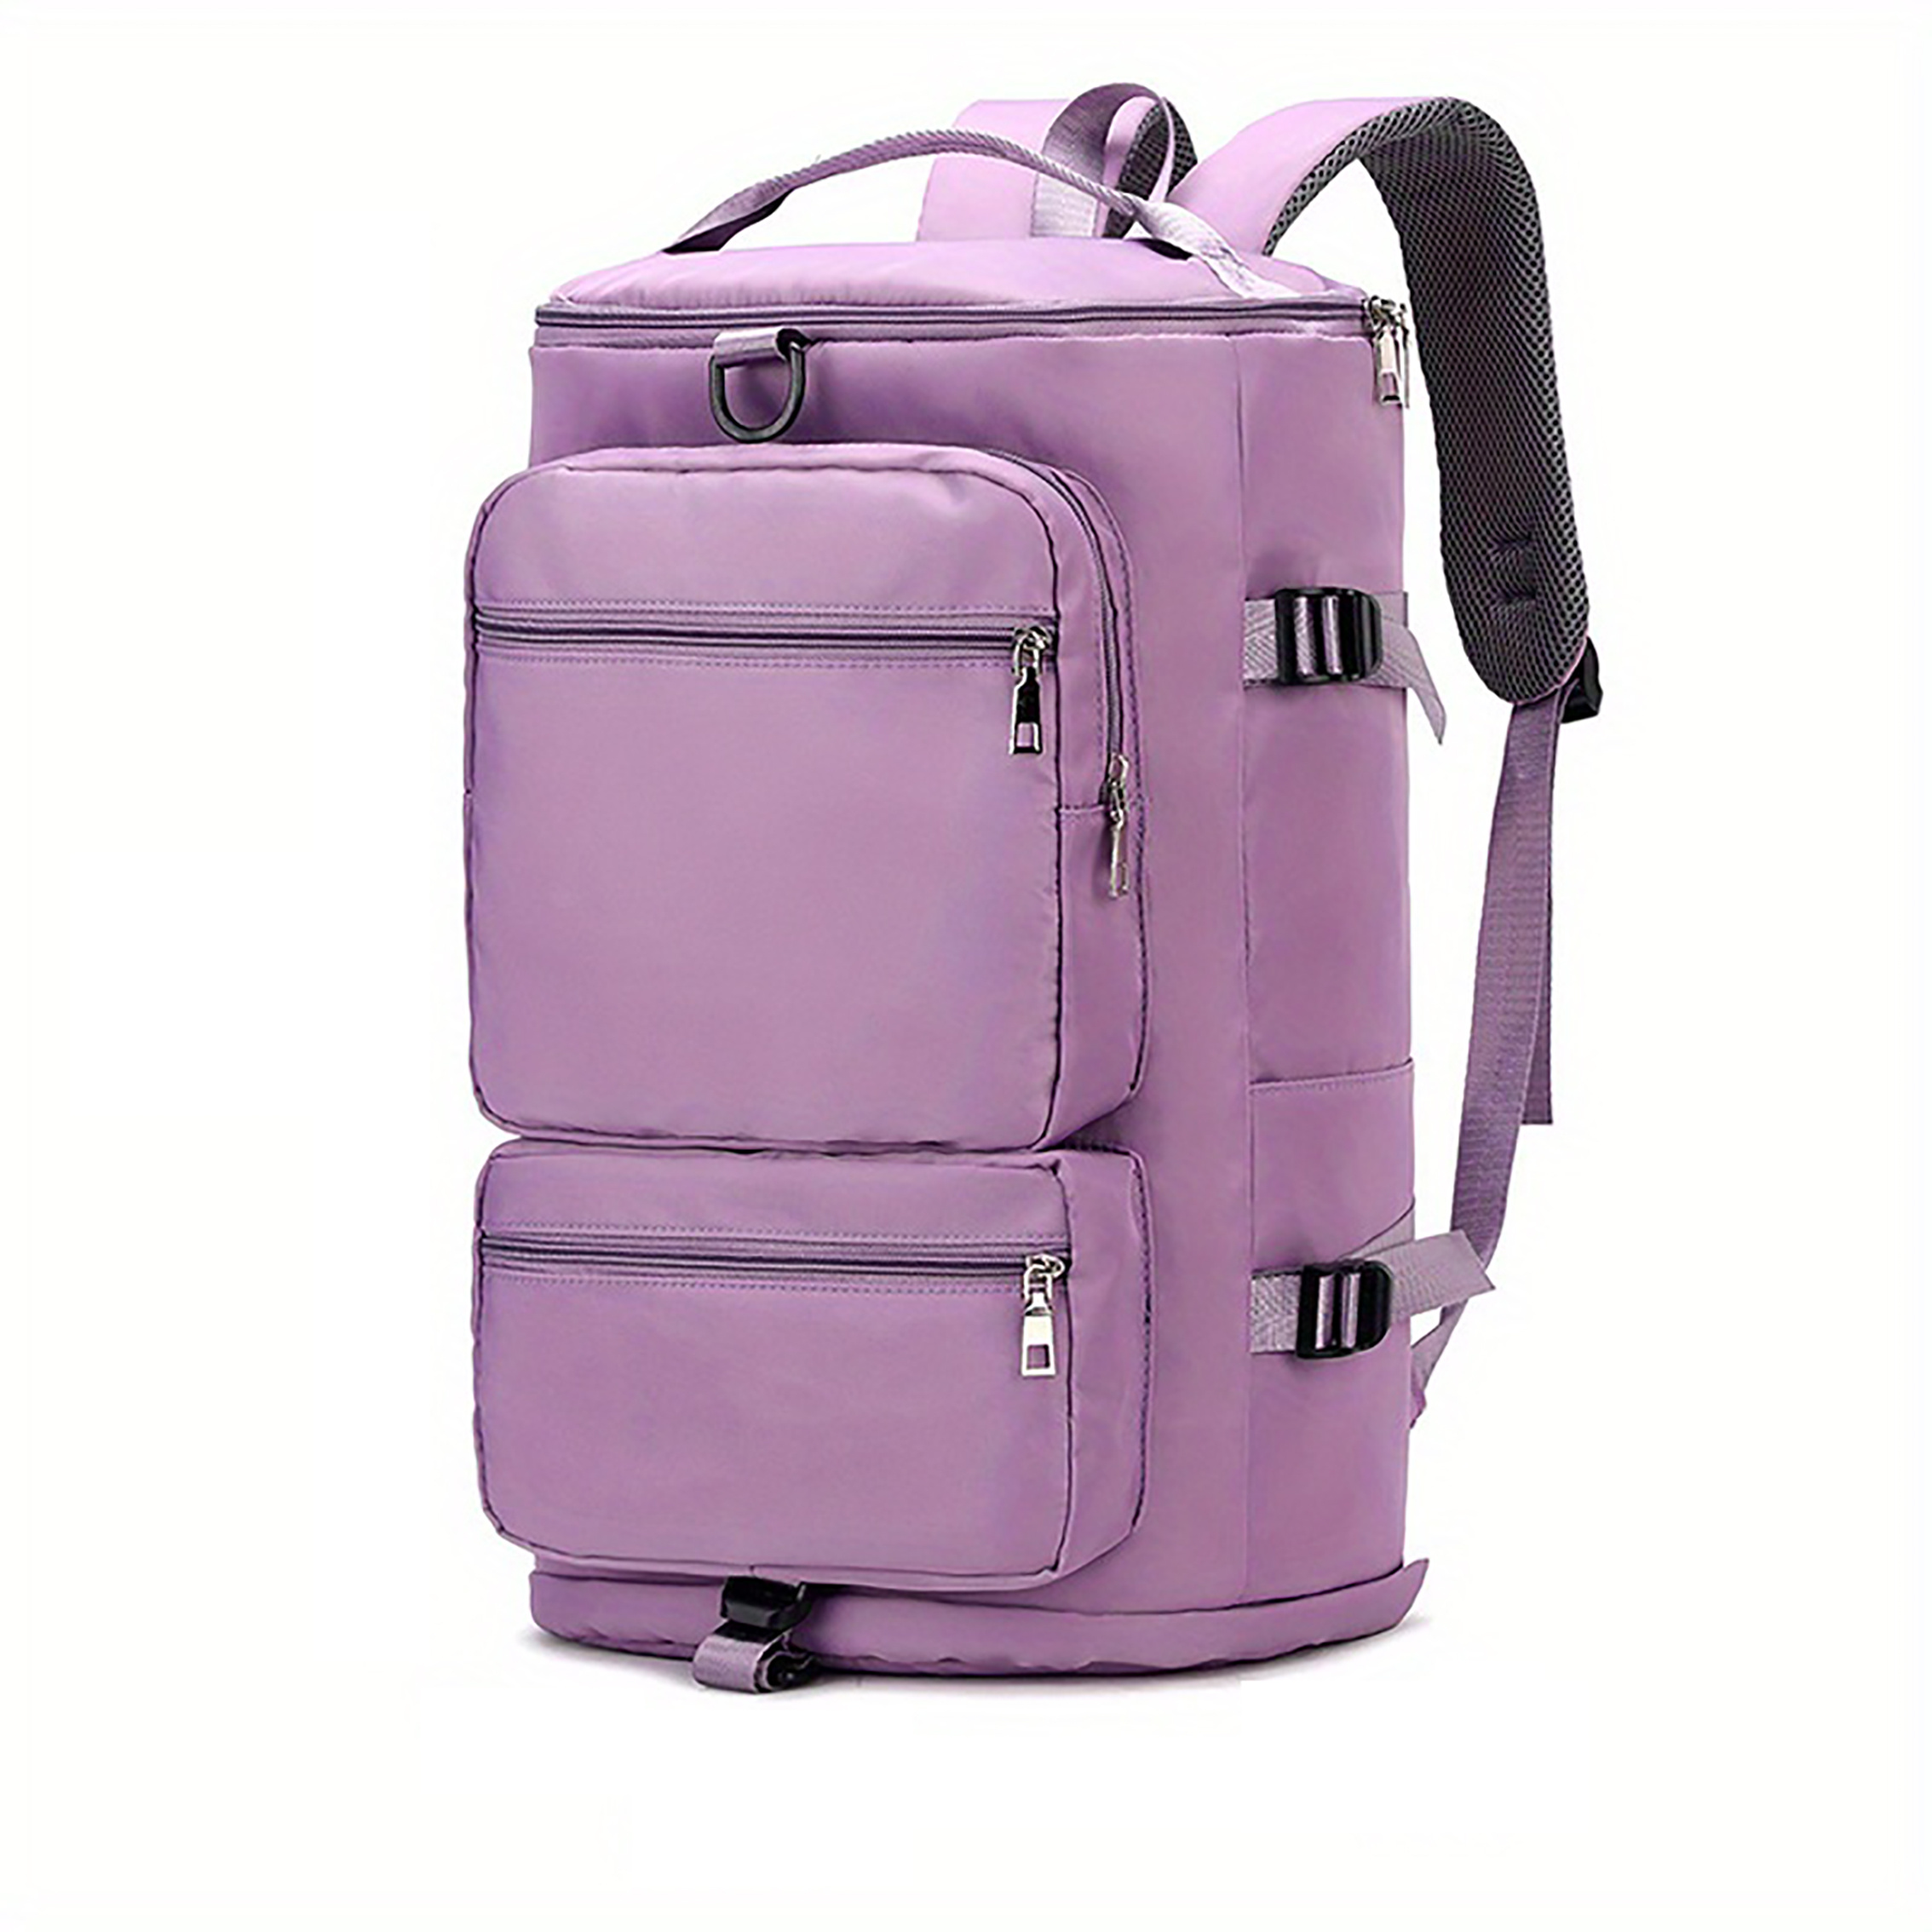 Large Capacity Portable Luggage Bag - Perfect For Sports Training, Travel & Backpacking With Shoe Compartment!